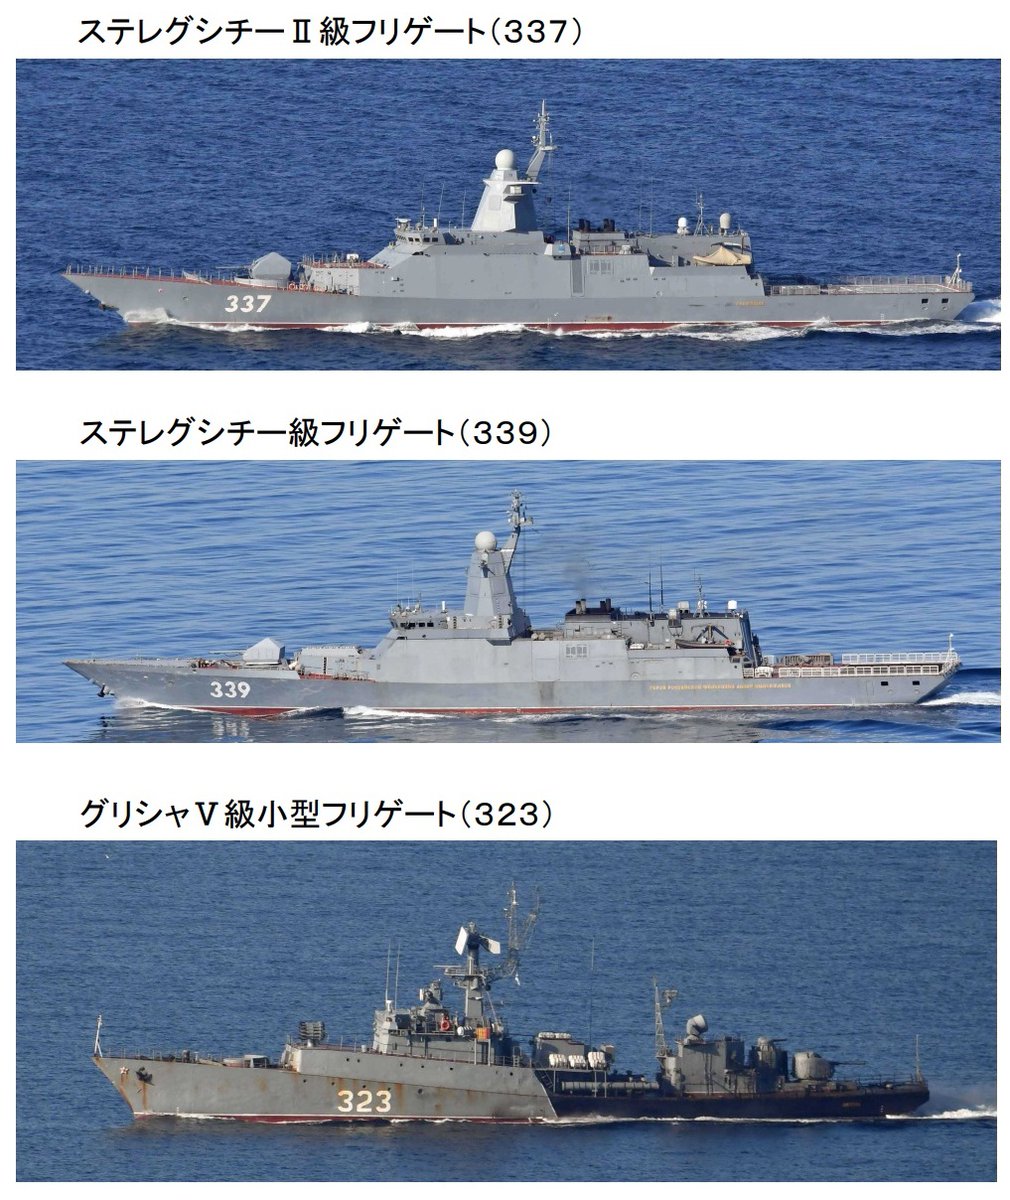 A 10-ship Russian naval group passed westbound thru the Tsugaru Strait 10 March between the Japanese main islands of Honshu and Hokkaido, retracing the route these ships took in Feb. Destroyer ADMIRAL PANTELEYEV 548 led the group that included corvettes SOVERSHENNY 333